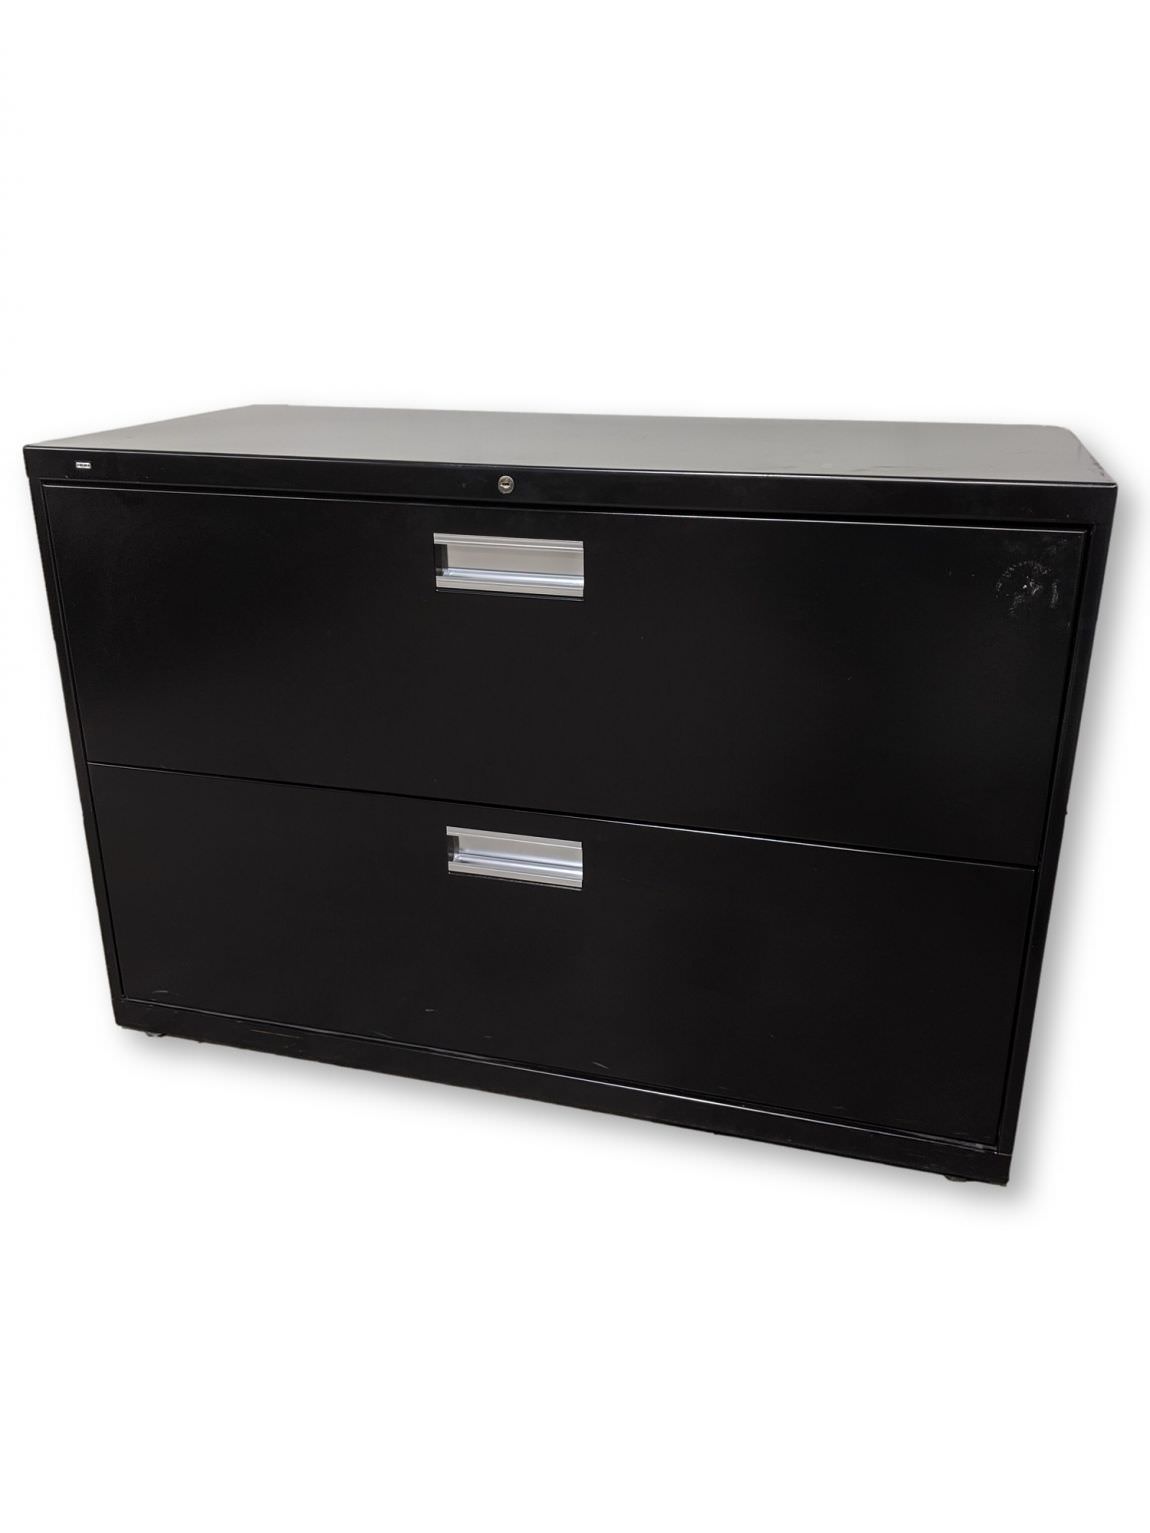 Black Hon 2 Drawer Lateral Filing Cabinet – 41.75 Inch Wide